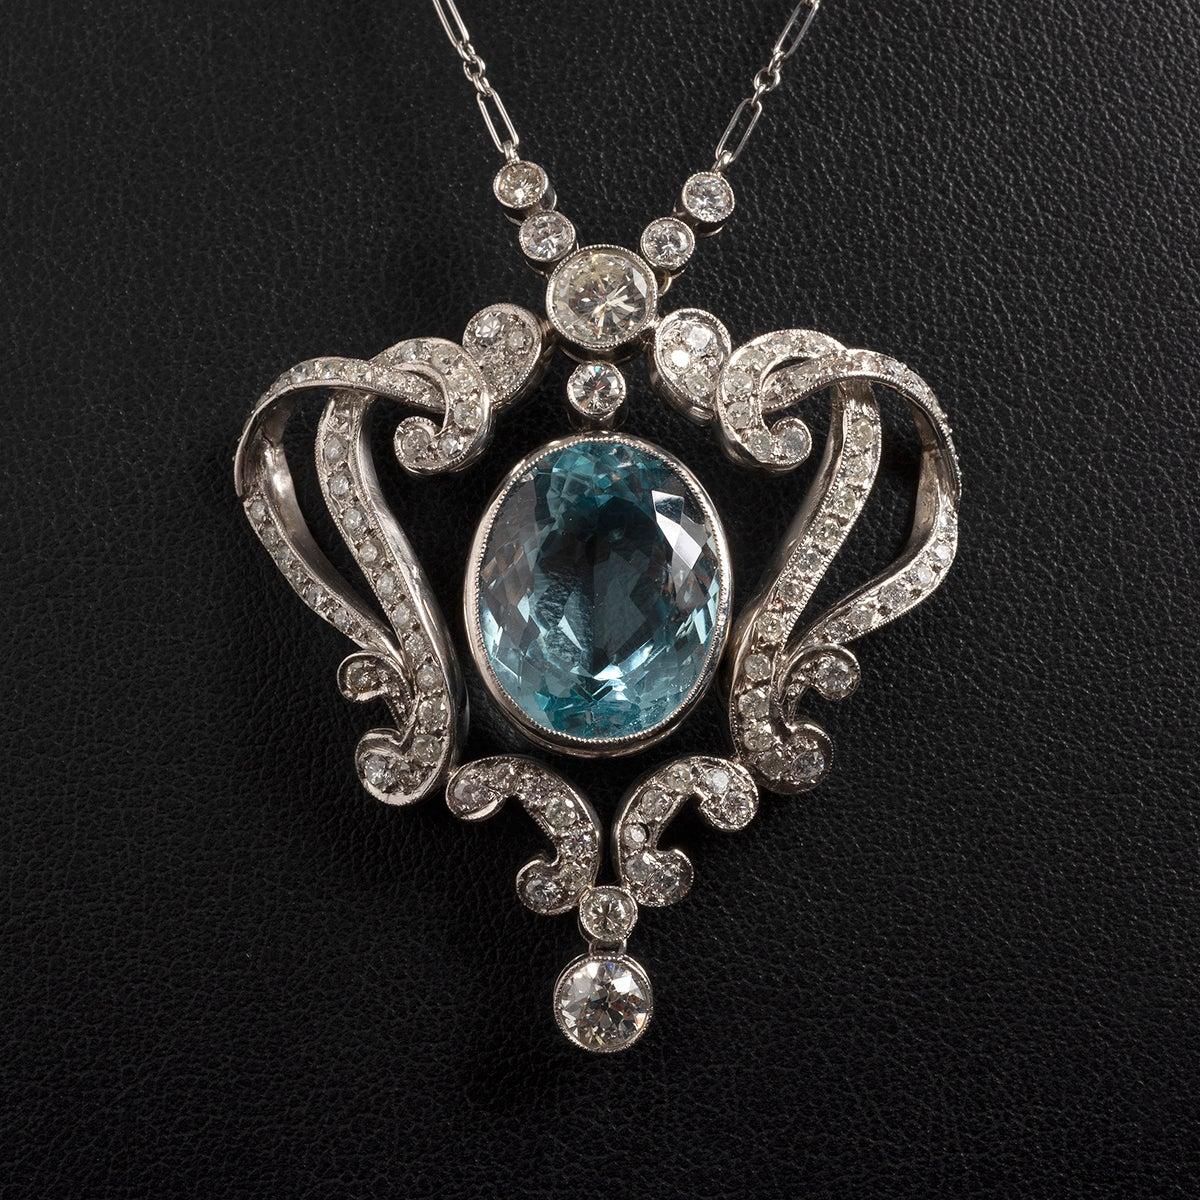 A unique piece within our carefully curated Vintage & Prestige fine jewellery collection, we are delighted to present the following:

Our incredible and noteworthy Victorian oval cut aquamarine (with diamond surround) necklace has the following